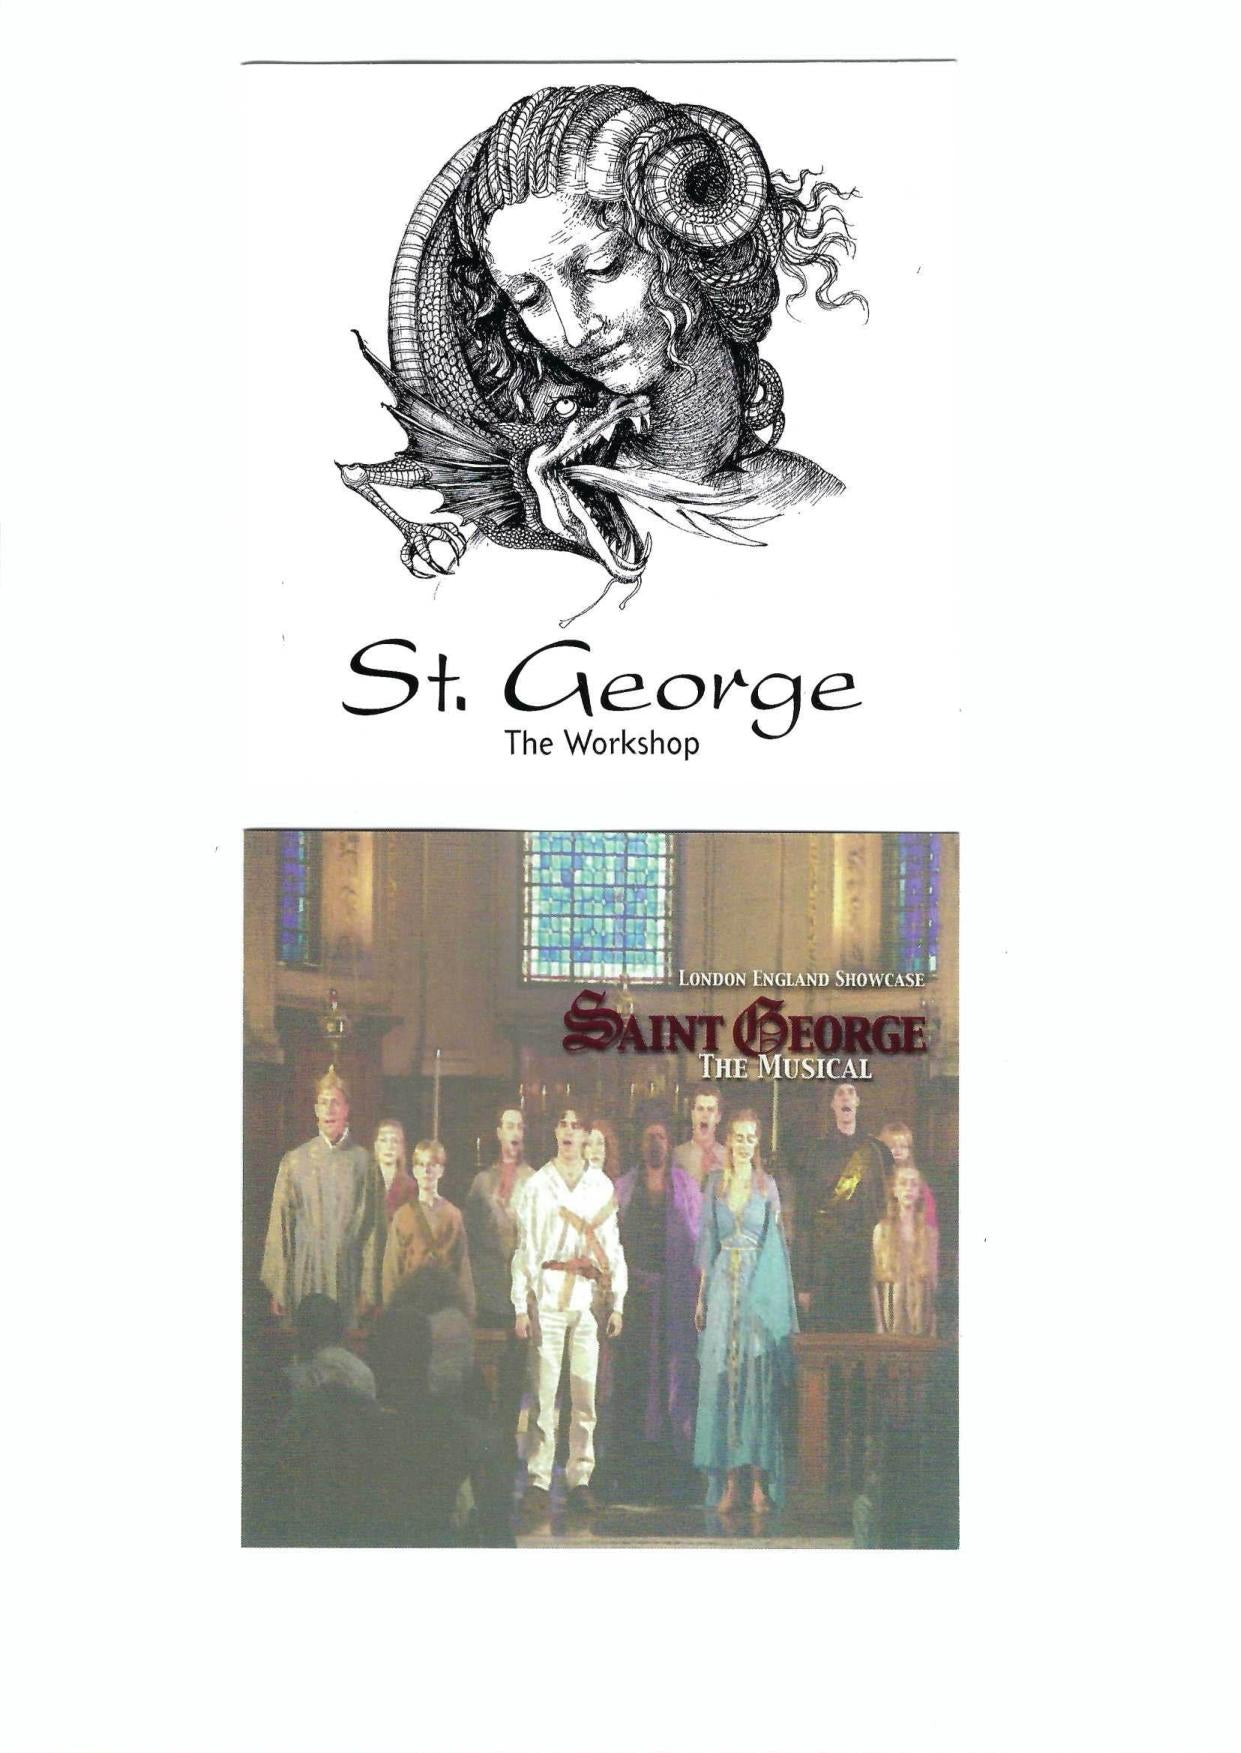 St. George: The Musical by Molly Yeomans and Jack Lenz: The London Workshop